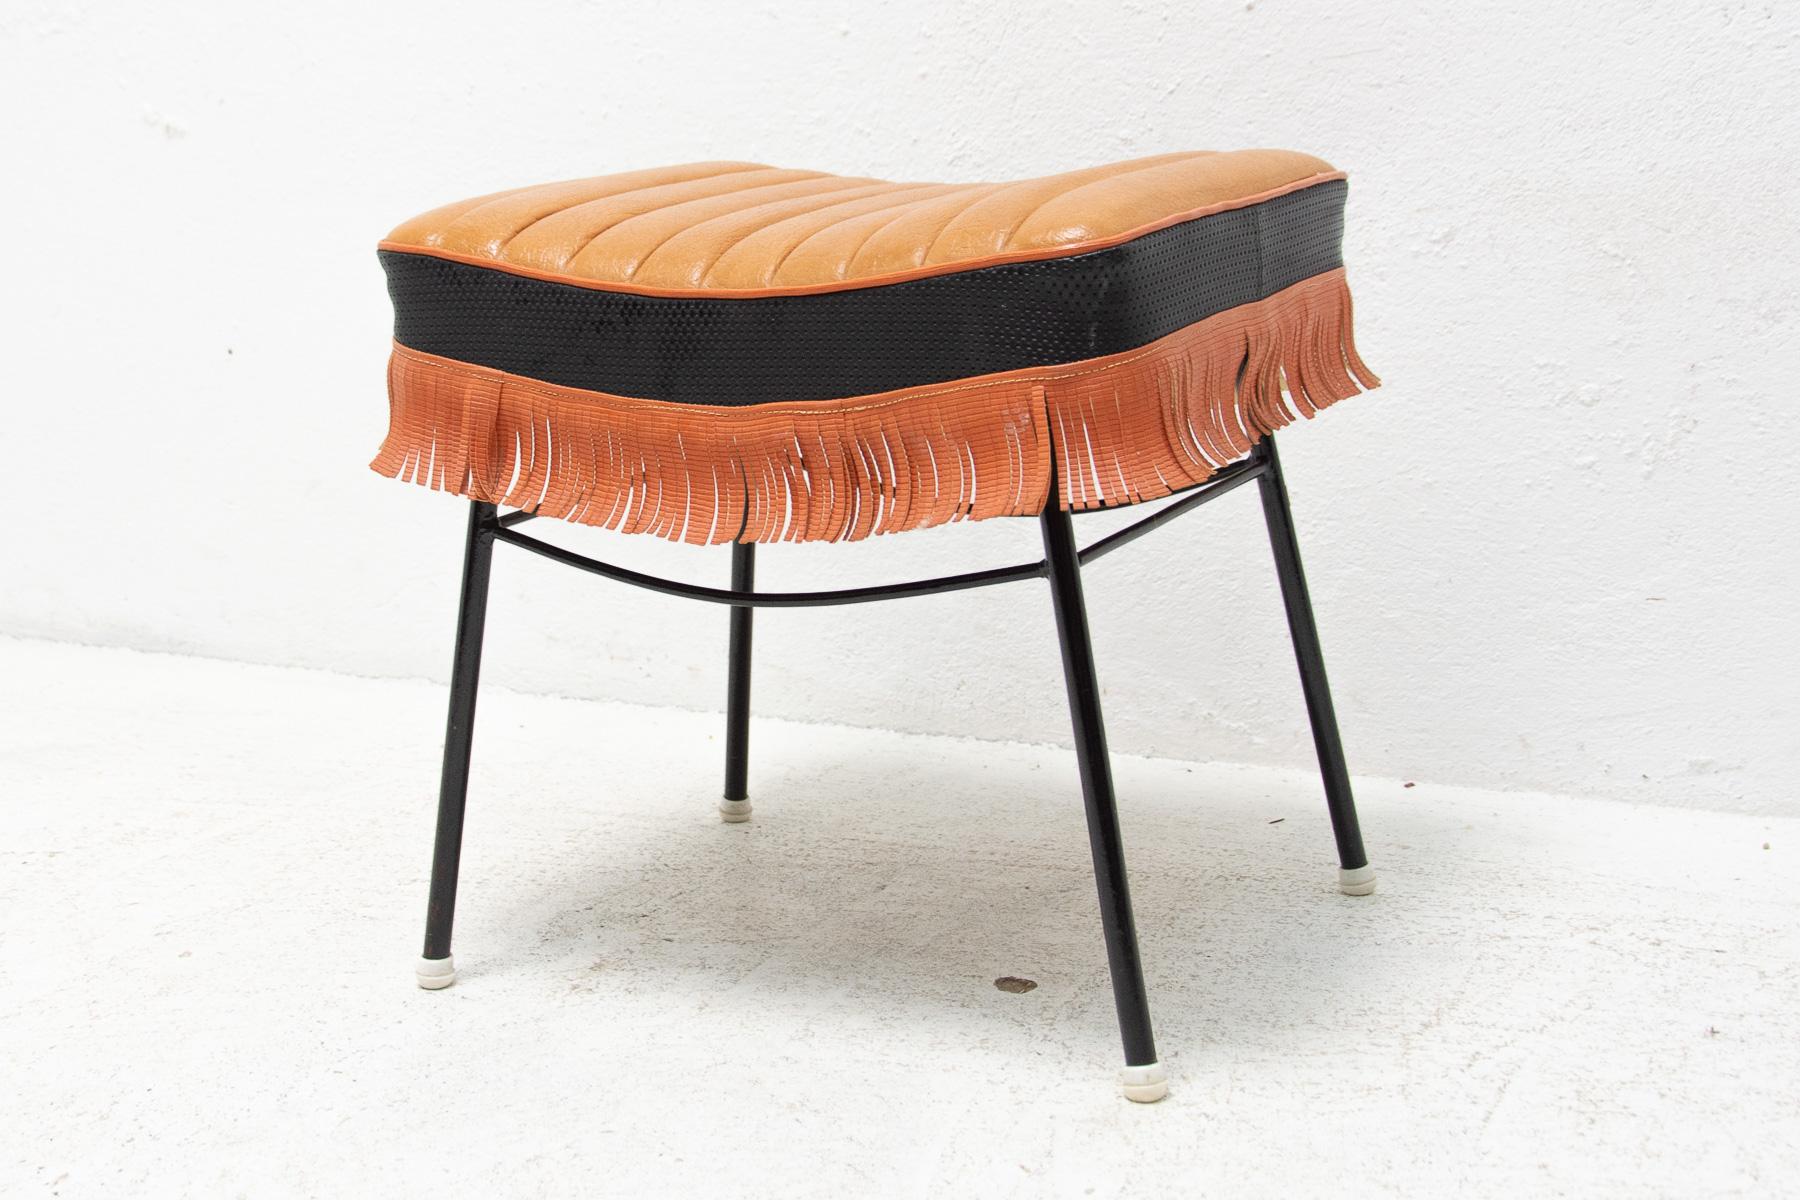 This stool was made in the former Czechoslovakia in the 1960´. The stool is upholstered in leather. The legs are made from iron. All in good original condition.
The leather bears signs of age and using.

Measure: Seat height: 42 cm.